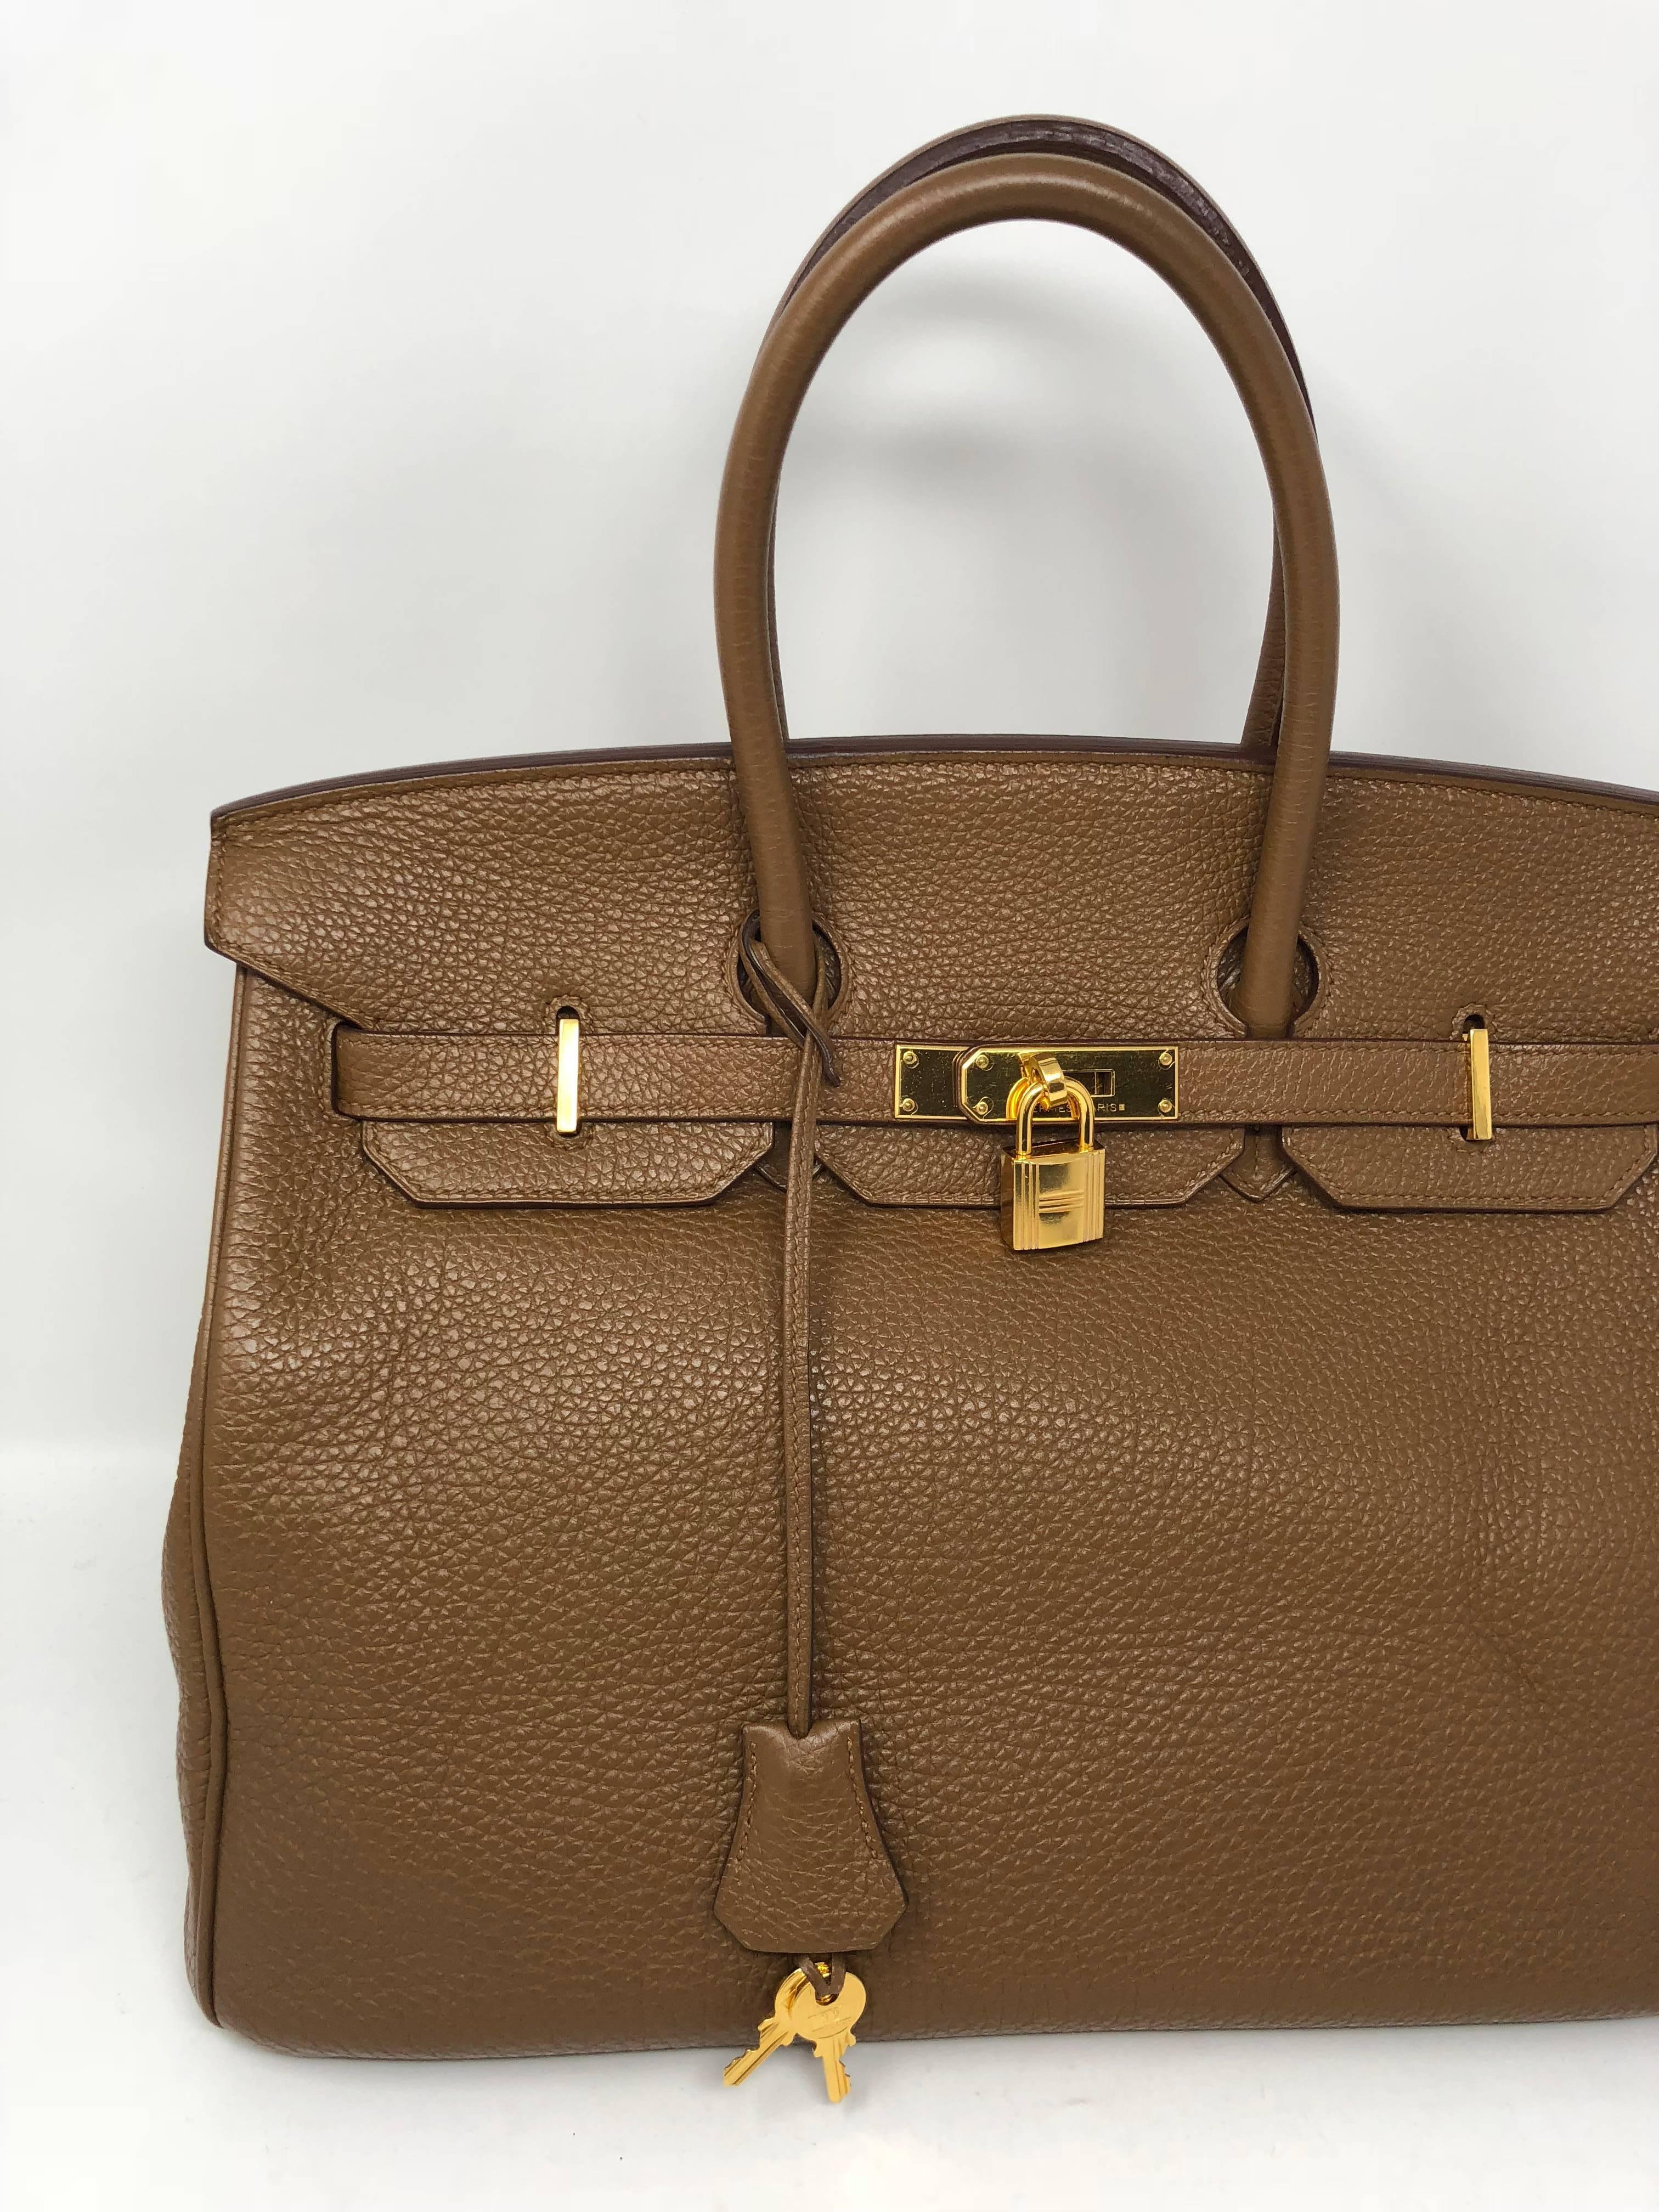 Hermes Birkin 35 in Alezan tan color in Togo leather. The tan/gold color is in gold hardware. Neutral color bag that will go with everything. Mint condition. 